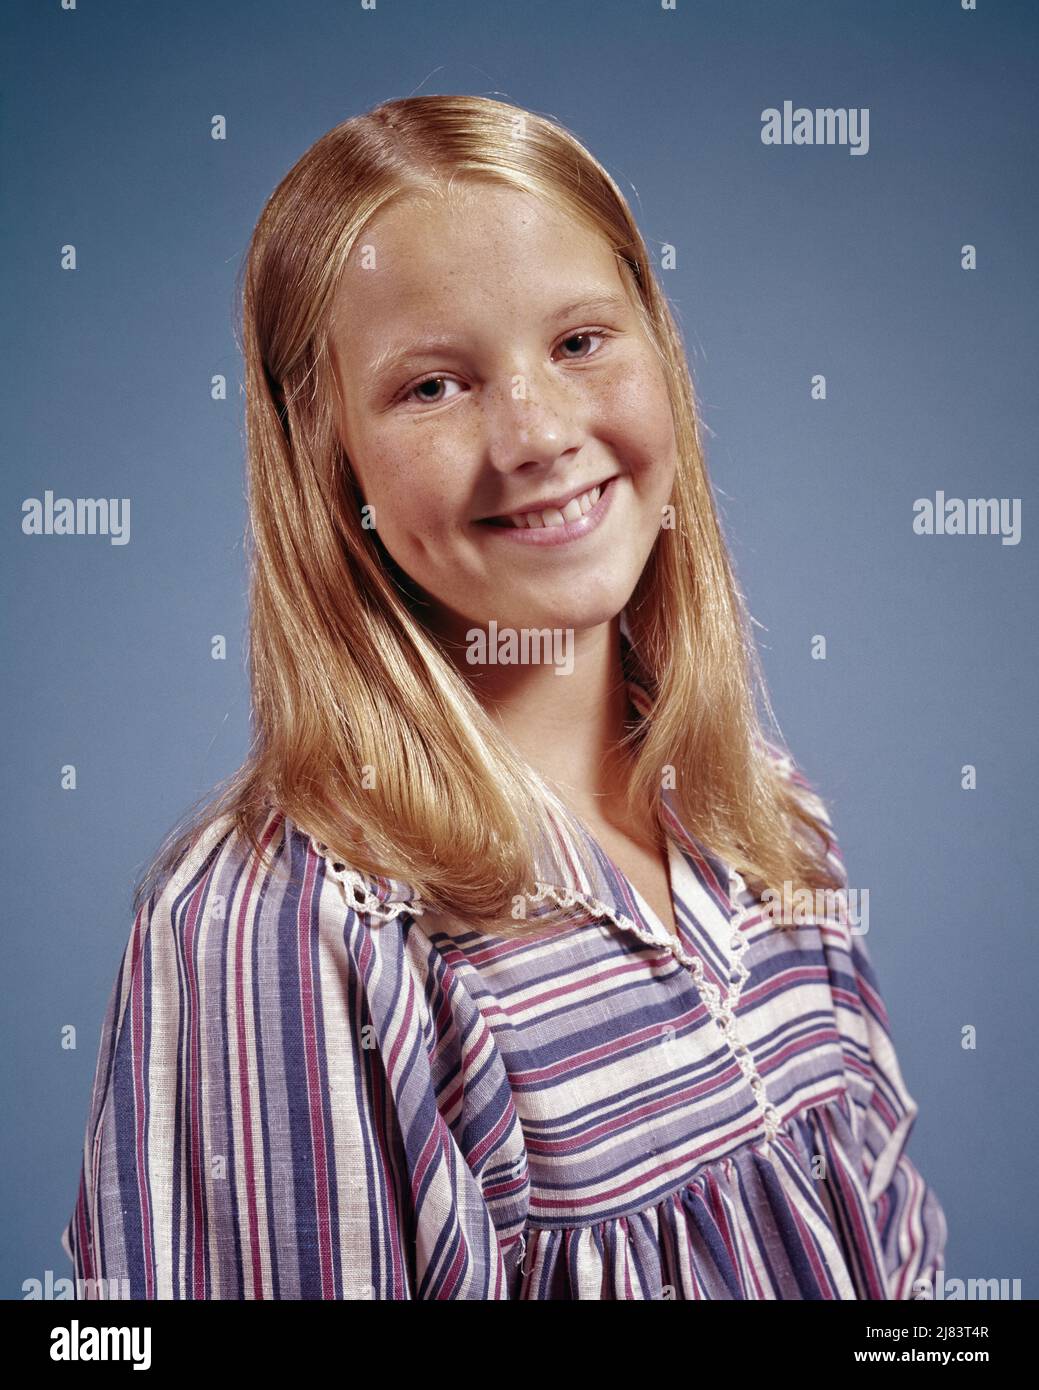 1970s PORTRAIT BLONDE SMILING TEENAGE GIRL WEARING BLUE WHITE STRIPED TOP LOOKING AT CAMERA - kj6503 HAR001 HARS WINNING STUDIO SHOT HEALTHINESS HOME LIFE COPY SPACE PERSONS TEENAGE GIRL FRECKLES CONFIDENCE EYE CONTACT HAPPINESS HEAD AND SHOULDERS CHEERFUL DIMPLES SMILES JOYFUL STYLISH TEENAGED PLEASANT AGREEABLE CHARMING GROWTH JUVENILES LOVABLE PLEASING ADORABLE APPEALING CAUCASIAN ETHNICITY HAR001 OLD FASHIONED Stock Photo